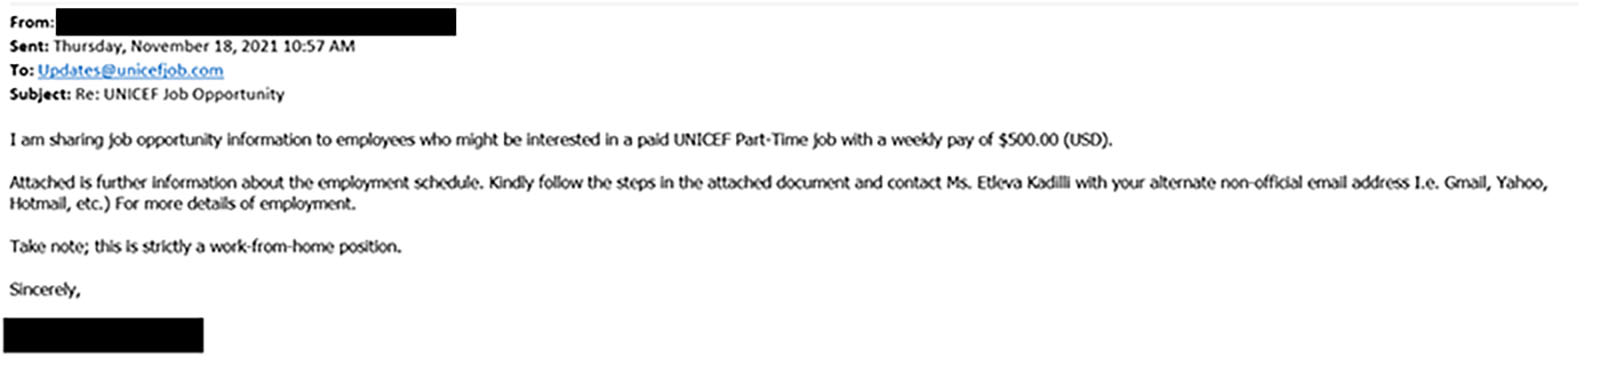 Example of phishing email offering a part-time job with UNICEF